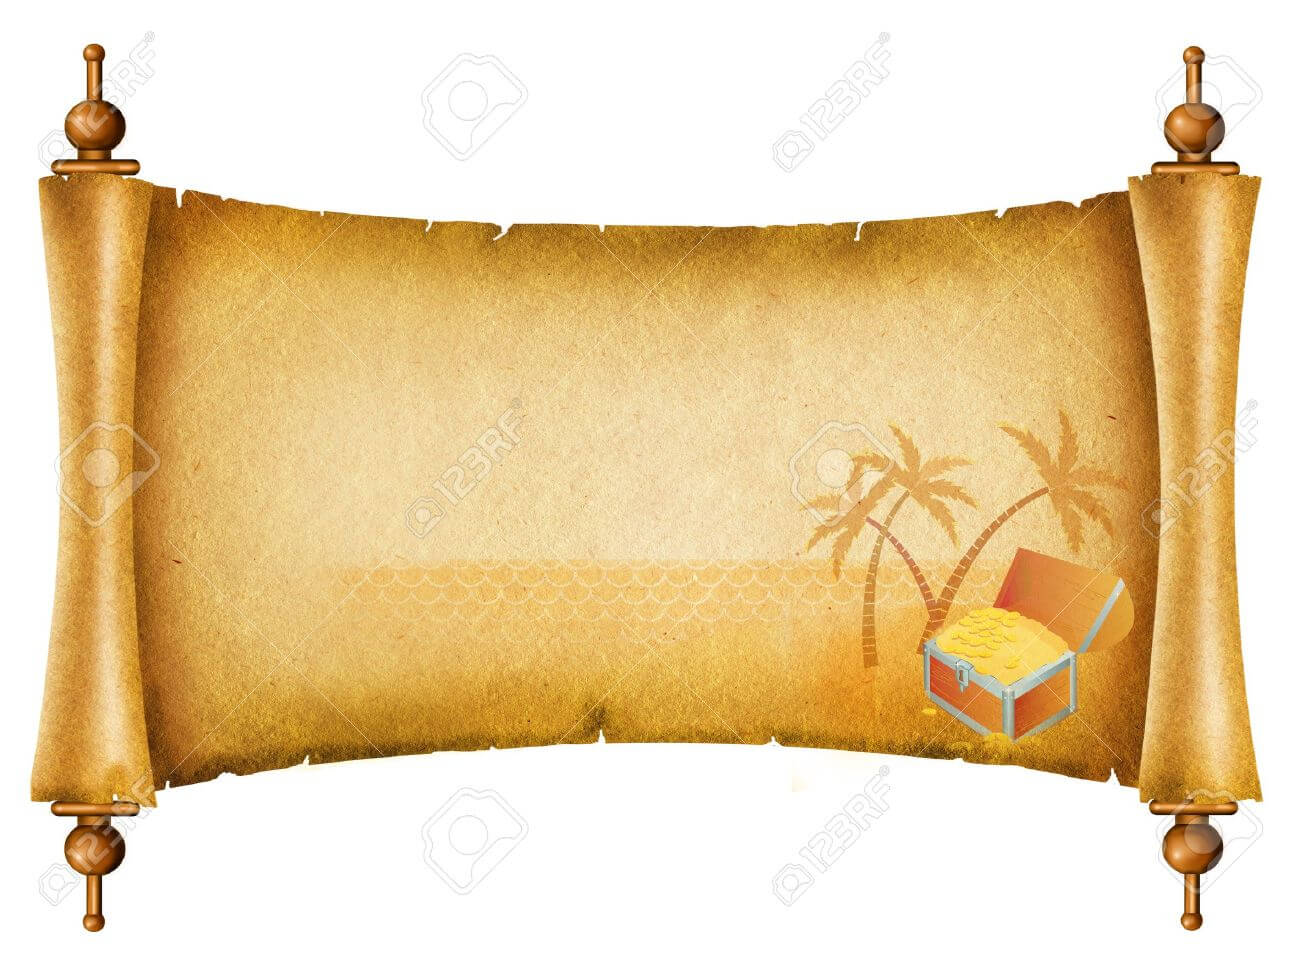 Blank Treasure Map Clipart Throughout Blank Pirate Map Template